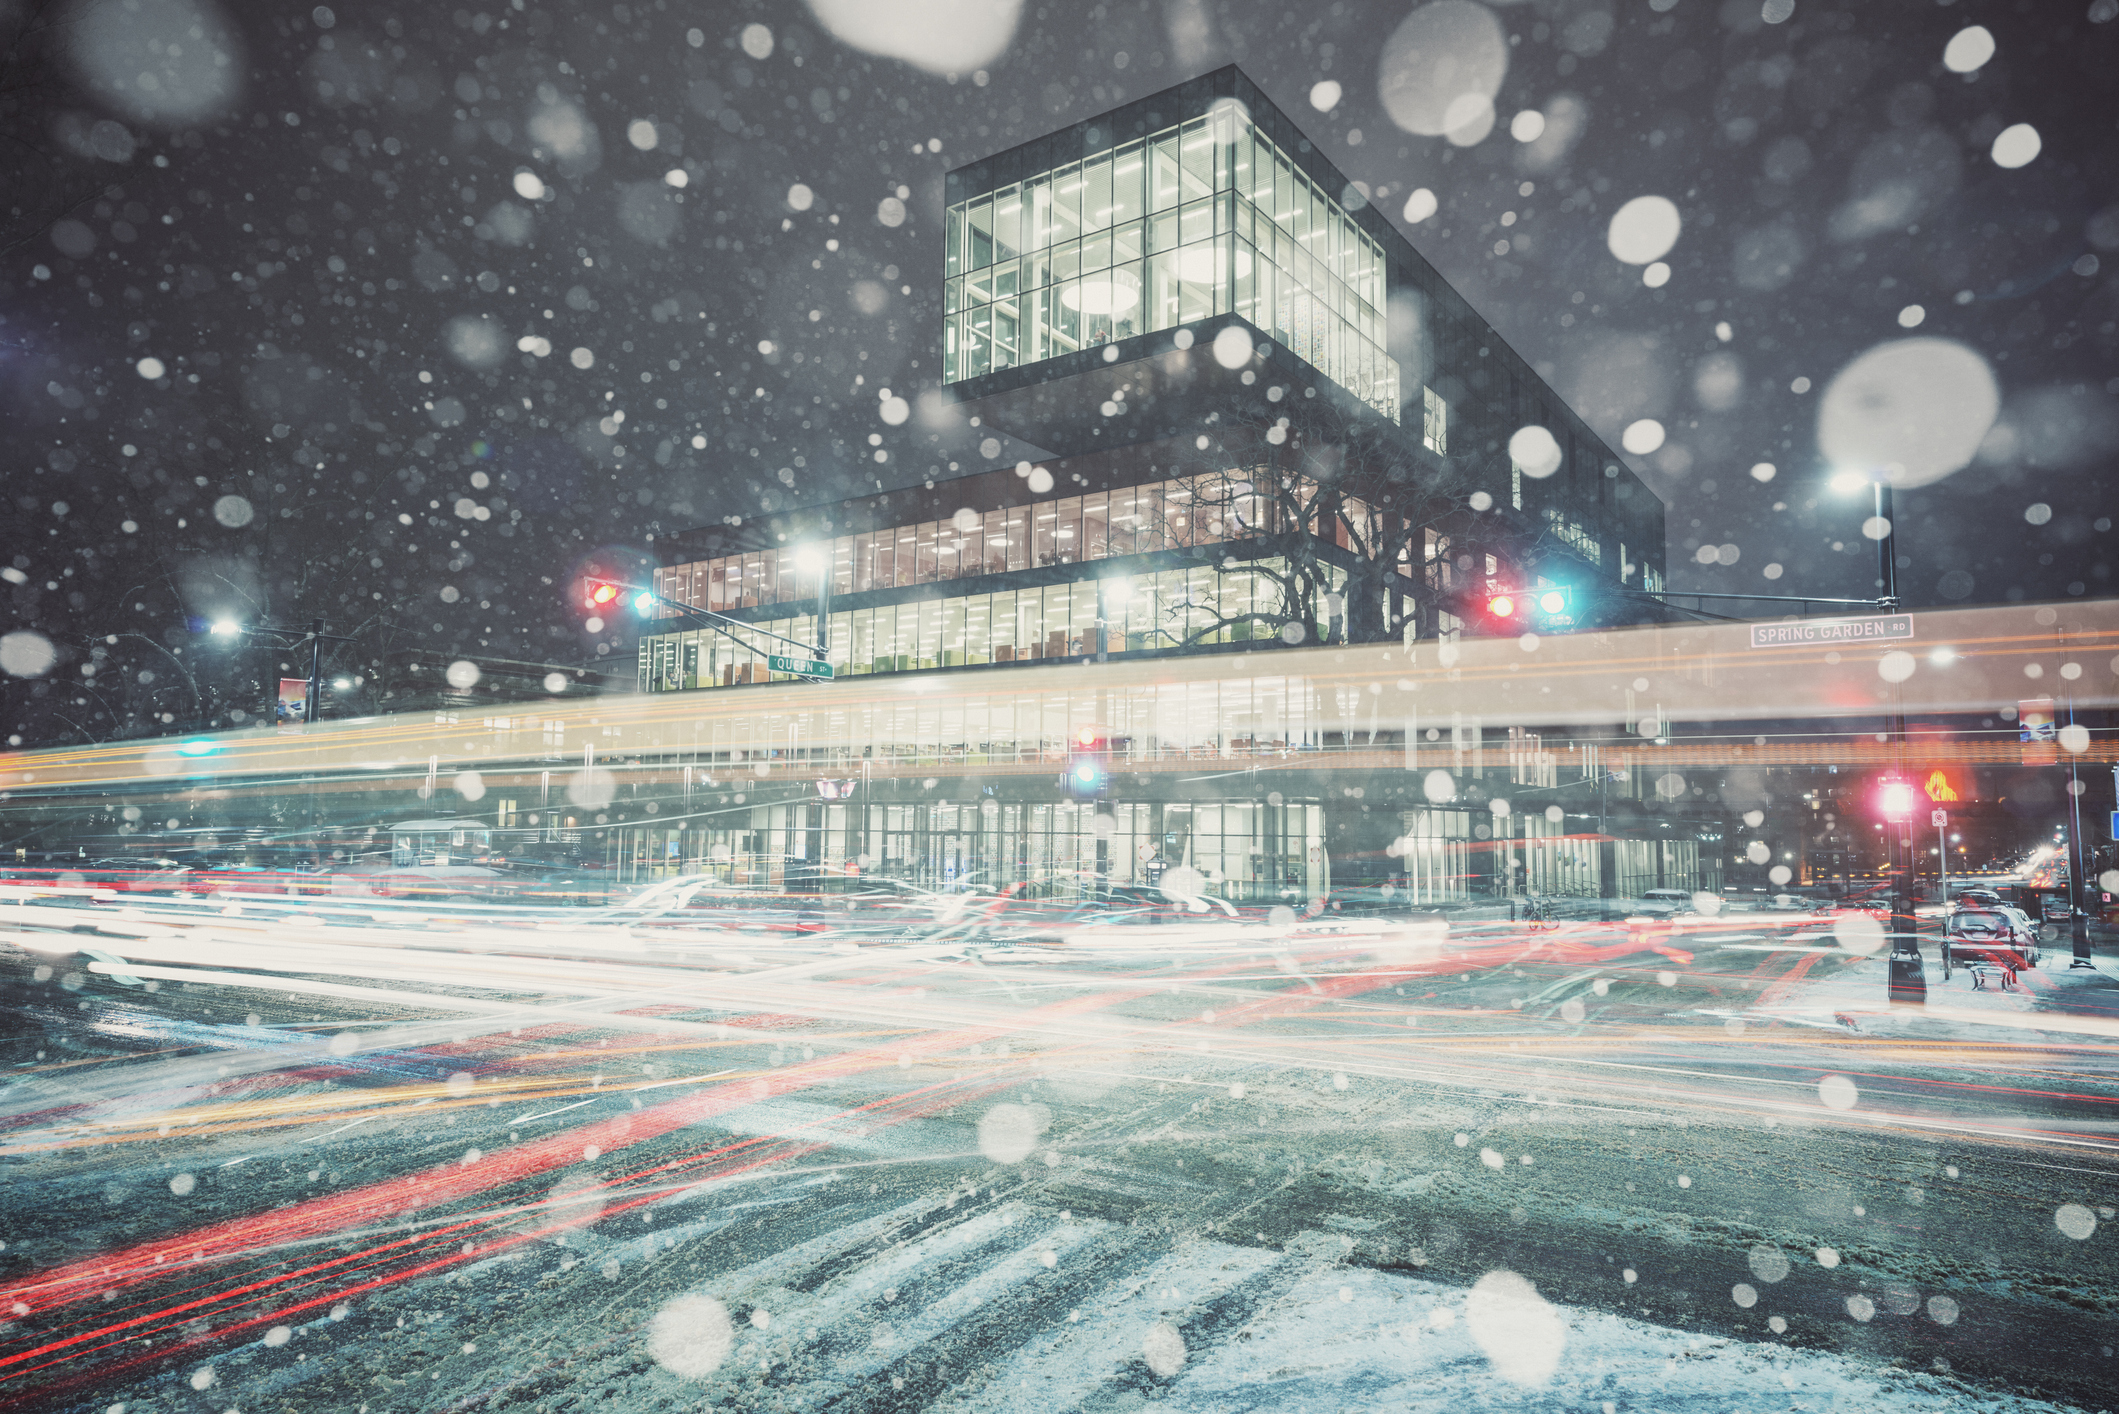 A blur of motion and falling snow at the intersection of Spring Garden and Queen streets in front of the newly completed Halifax Central Public Library.  Long exposure.